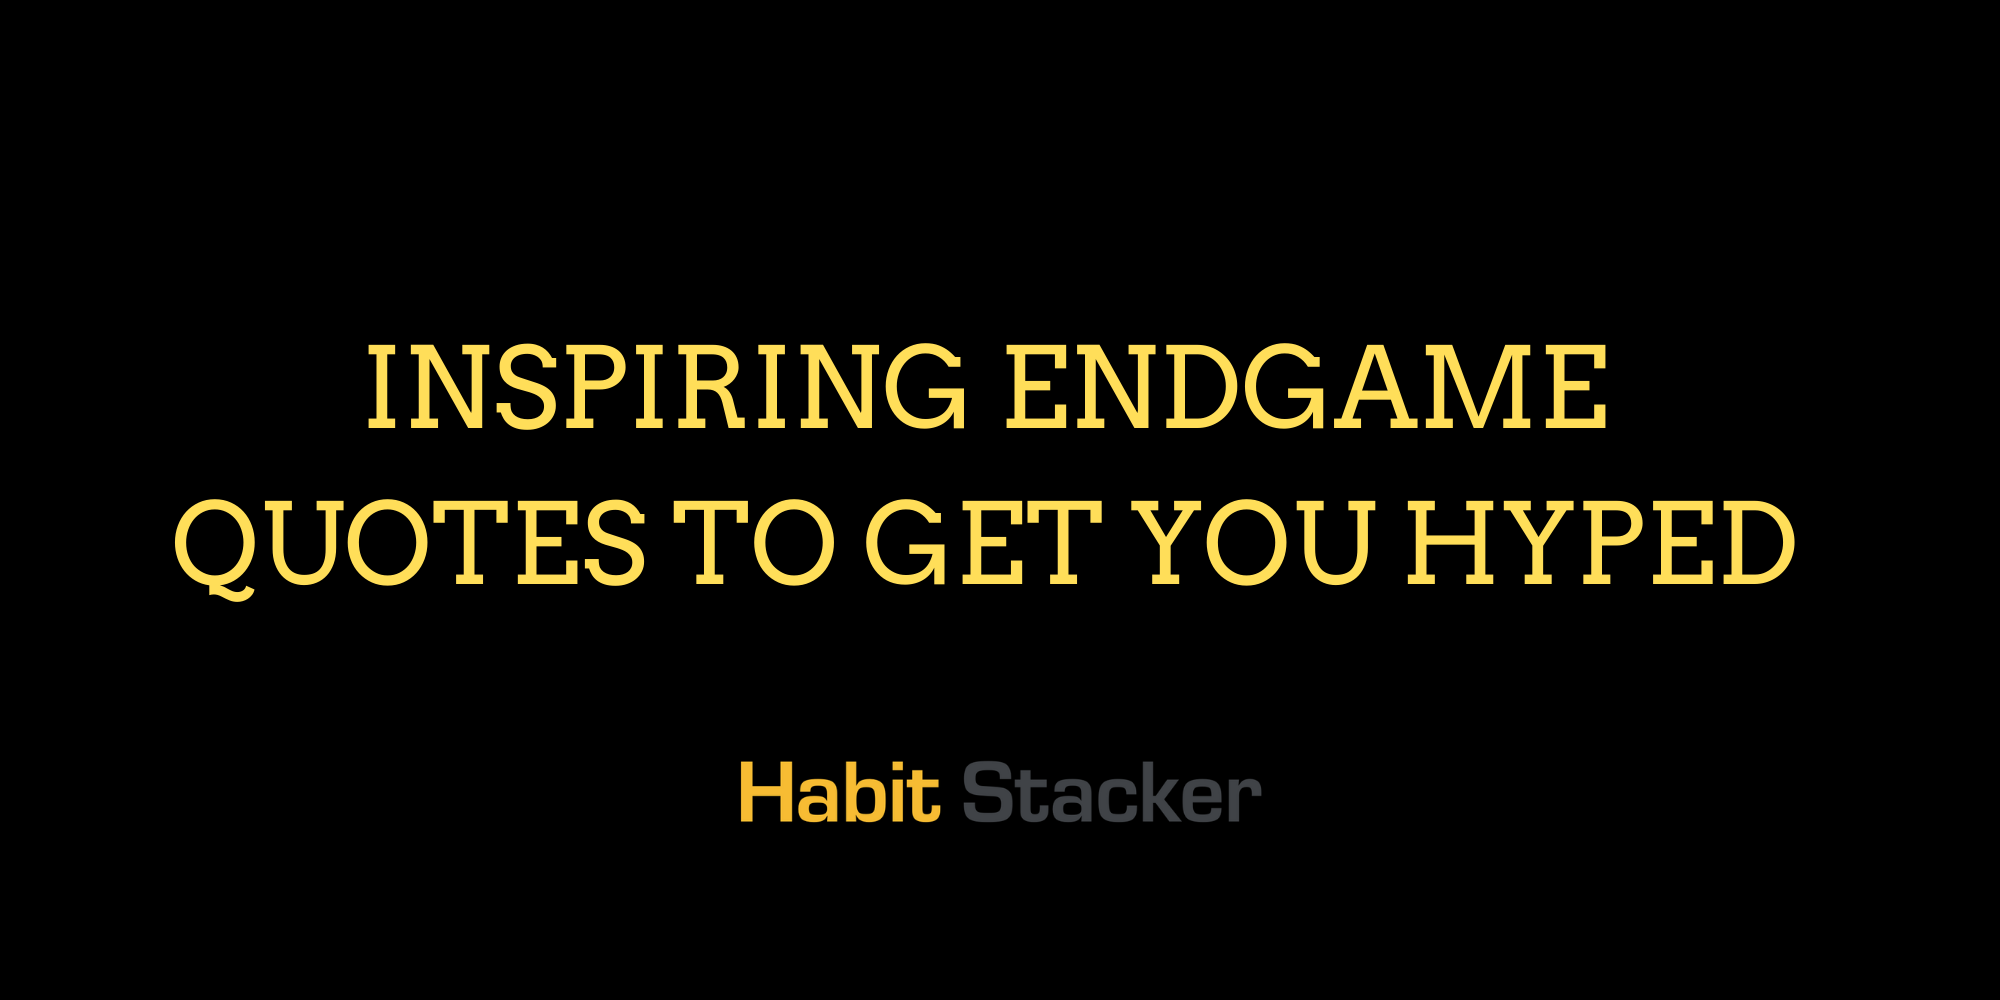 35 Inspiring Endgame Quotes To Get You Hyped | Habit Stacker